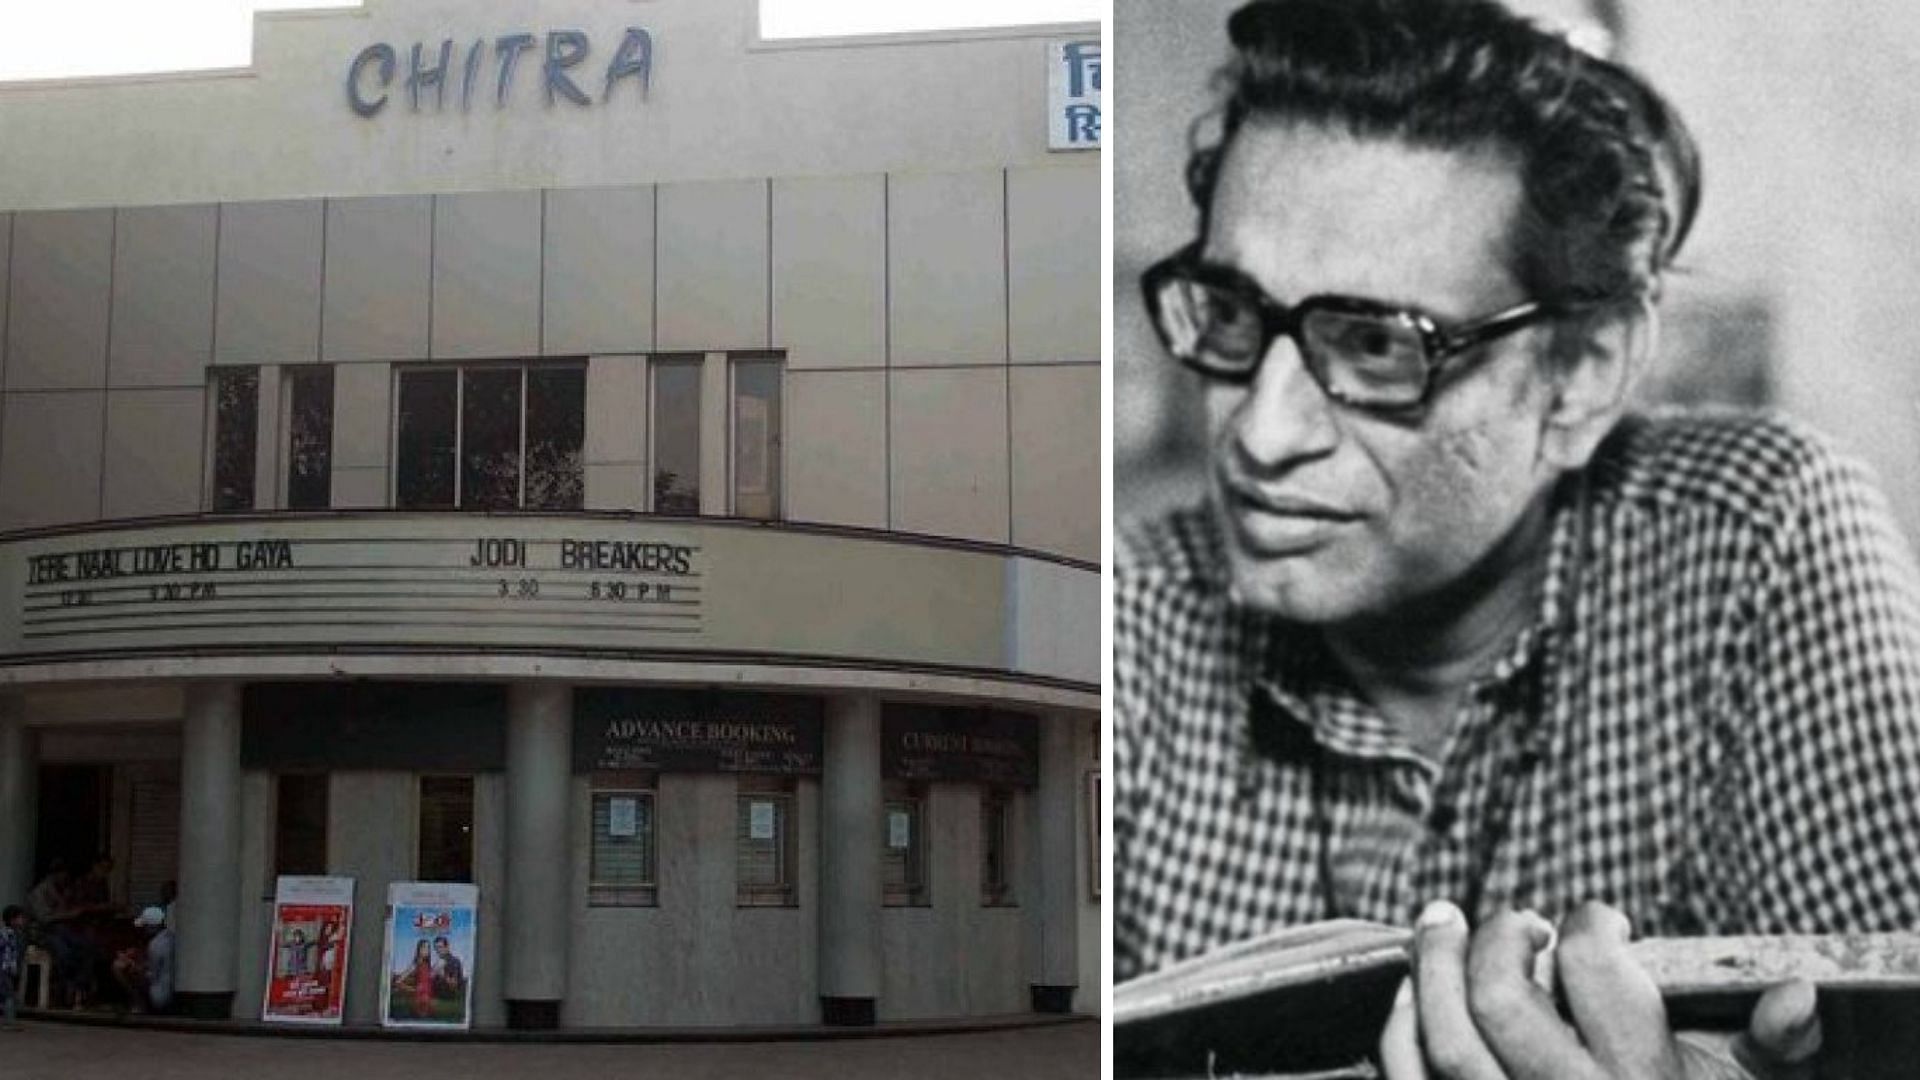 Chitra Cinema was known to screen Satyajit Ray’s films.